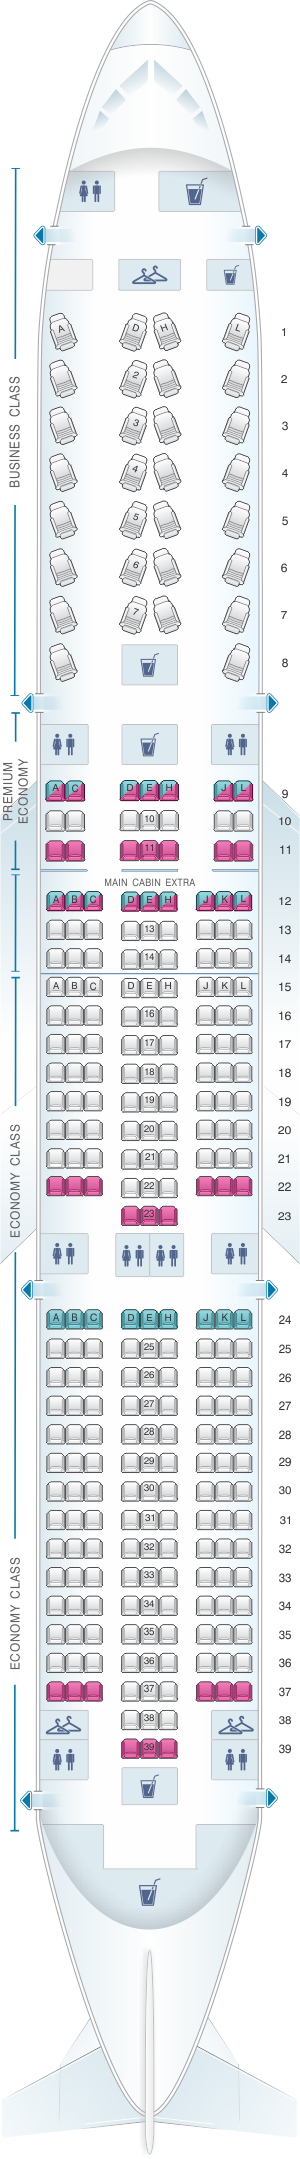 American Airlines Seat Map